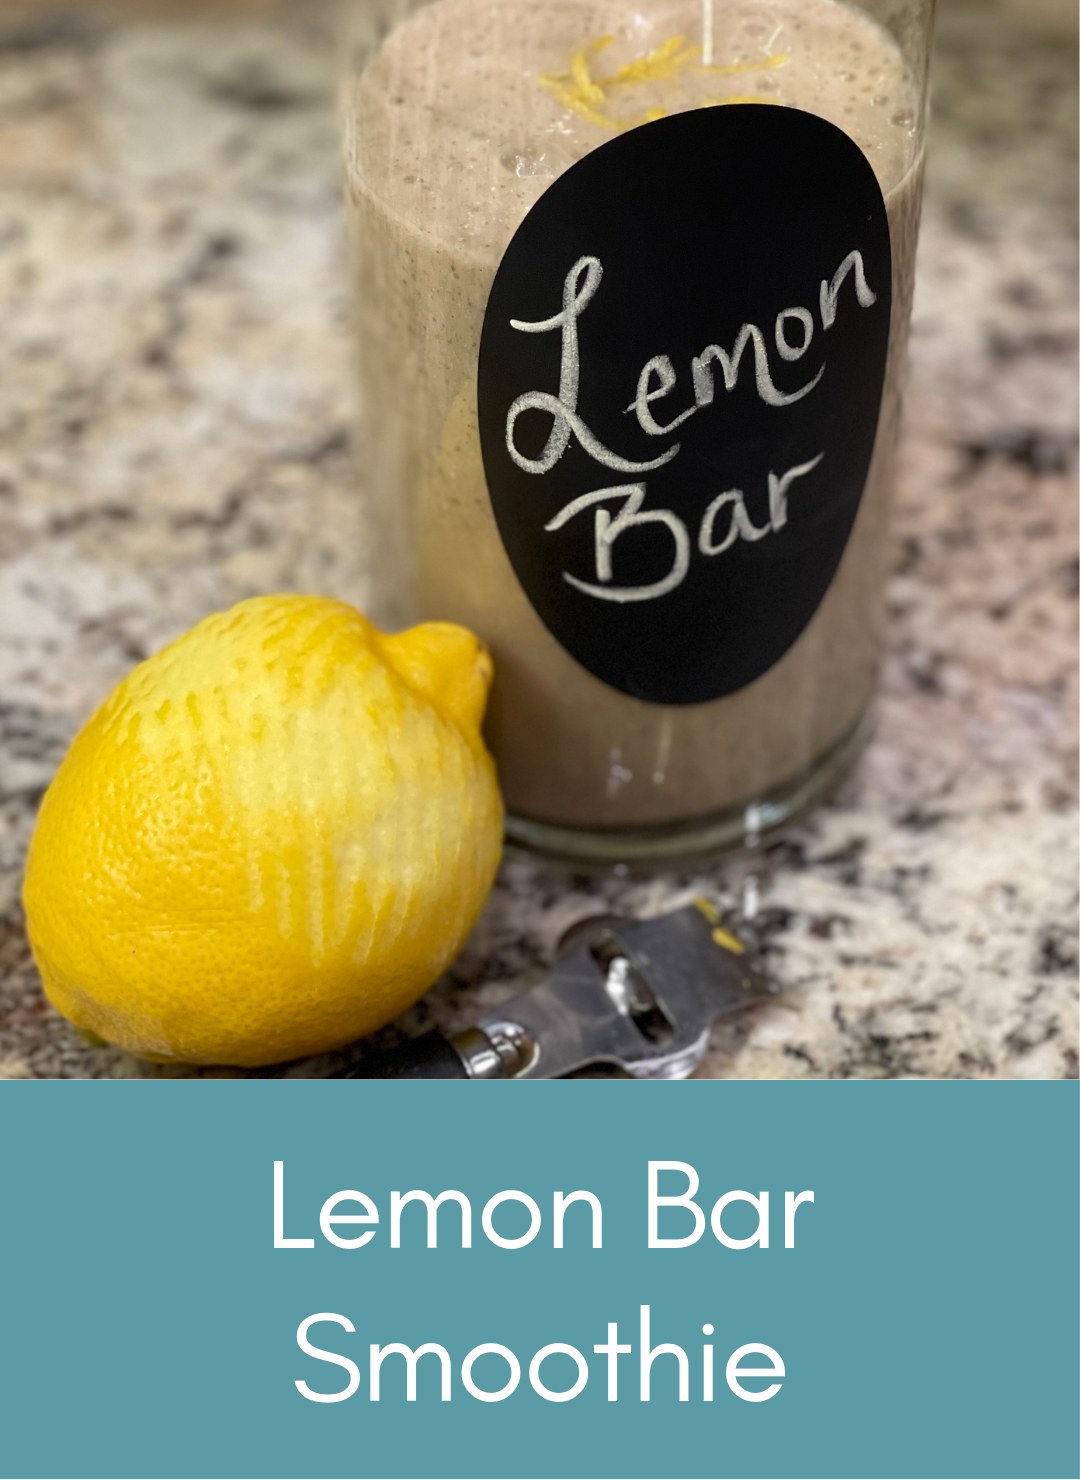 Lemon bar whole food plant based vegan smoothie Picture with link to recipe